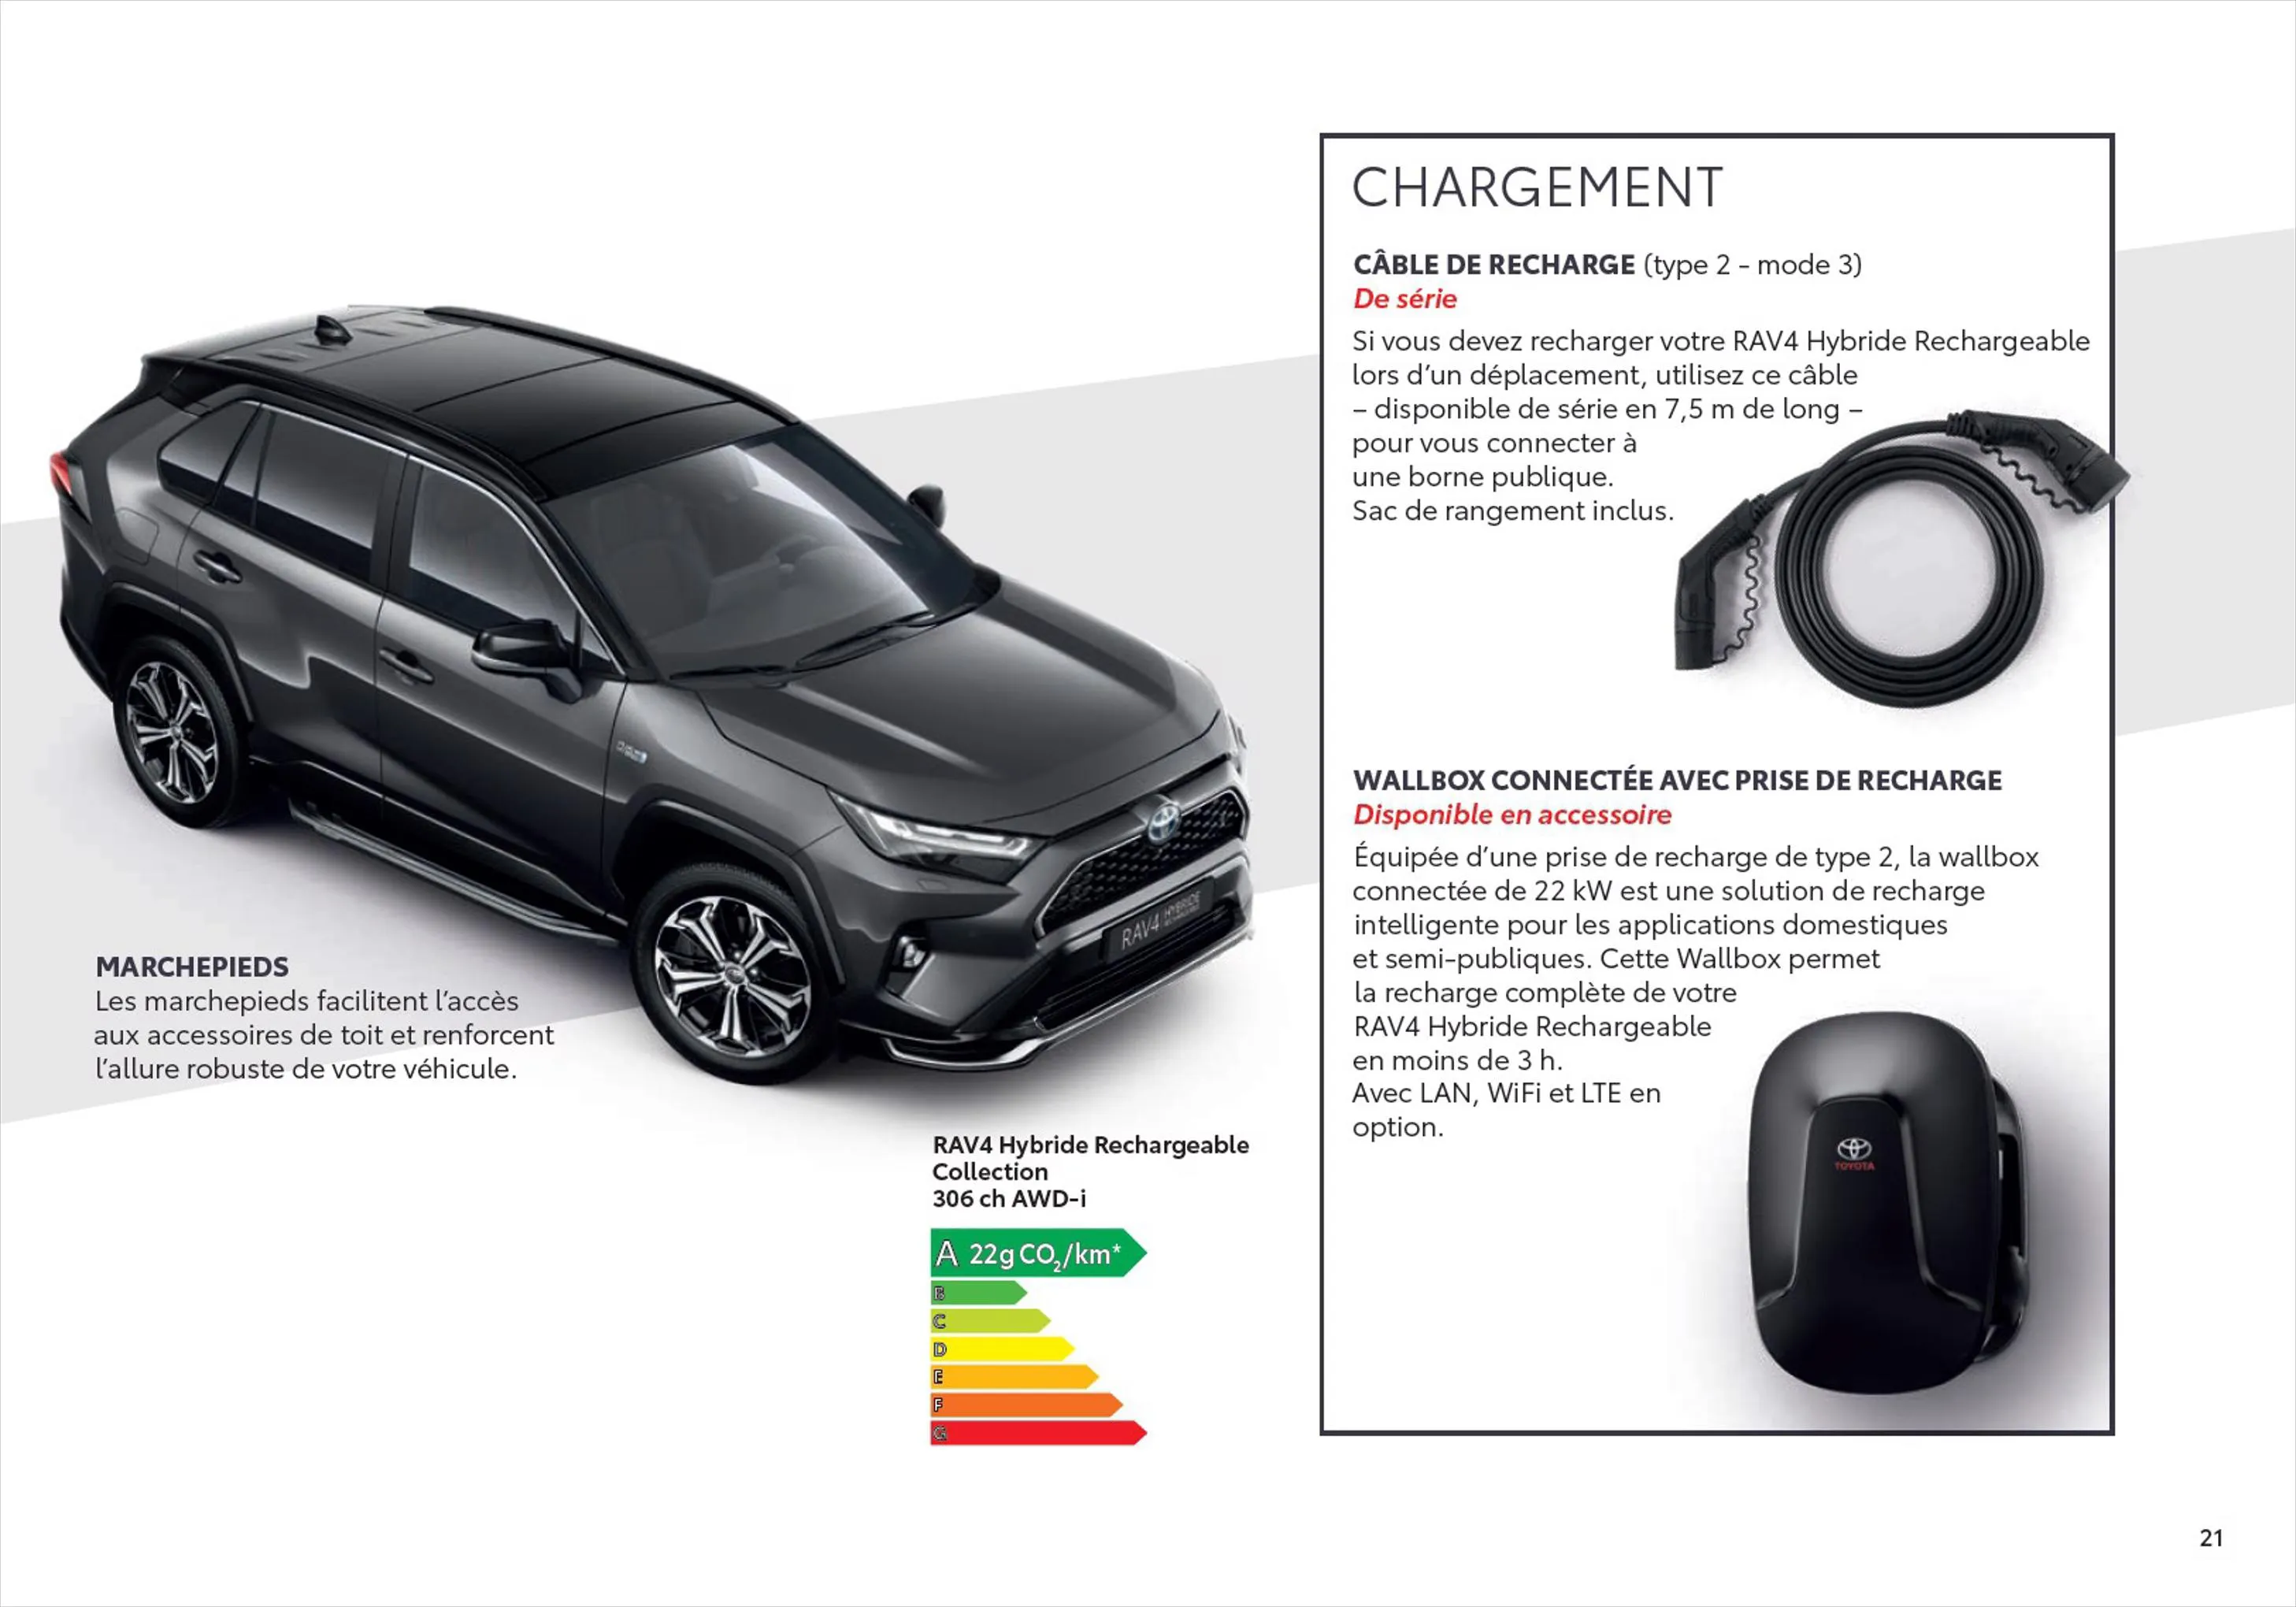 Catalogue Toyota RAV4 Hybride Rechargeable, page 00021